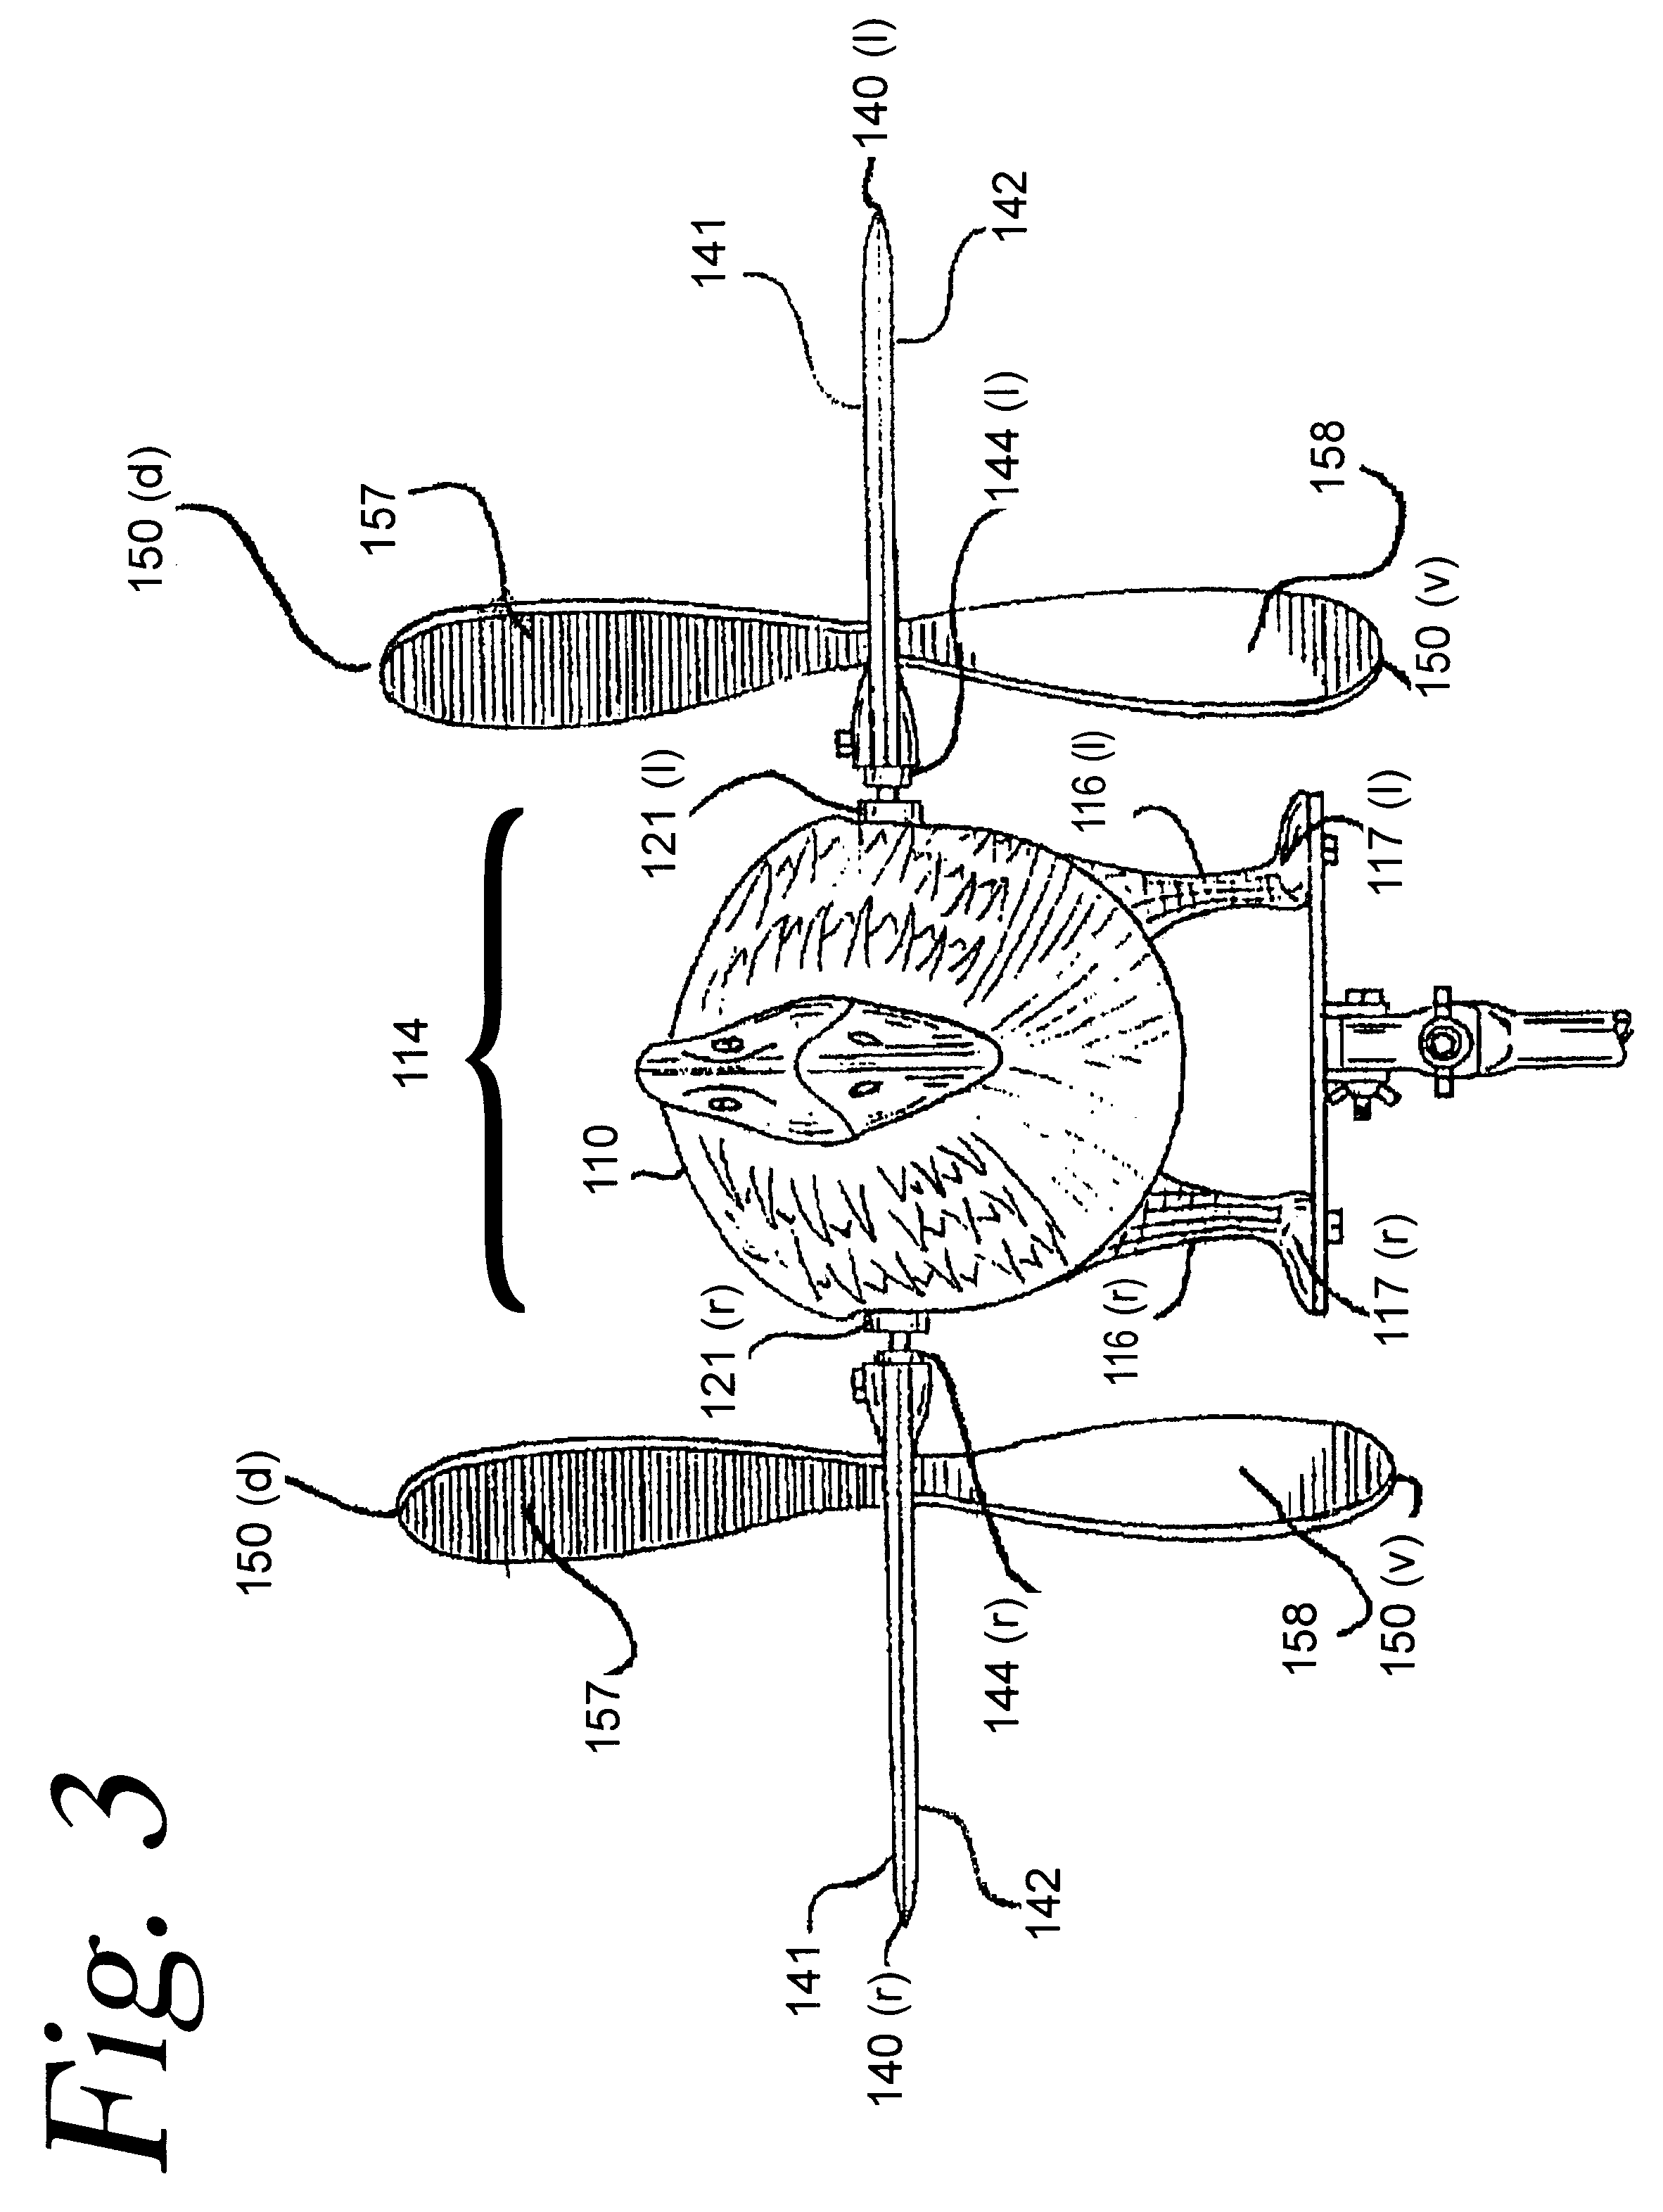 Decoy apparatus with adjustable pitch rotor blade wing assembly